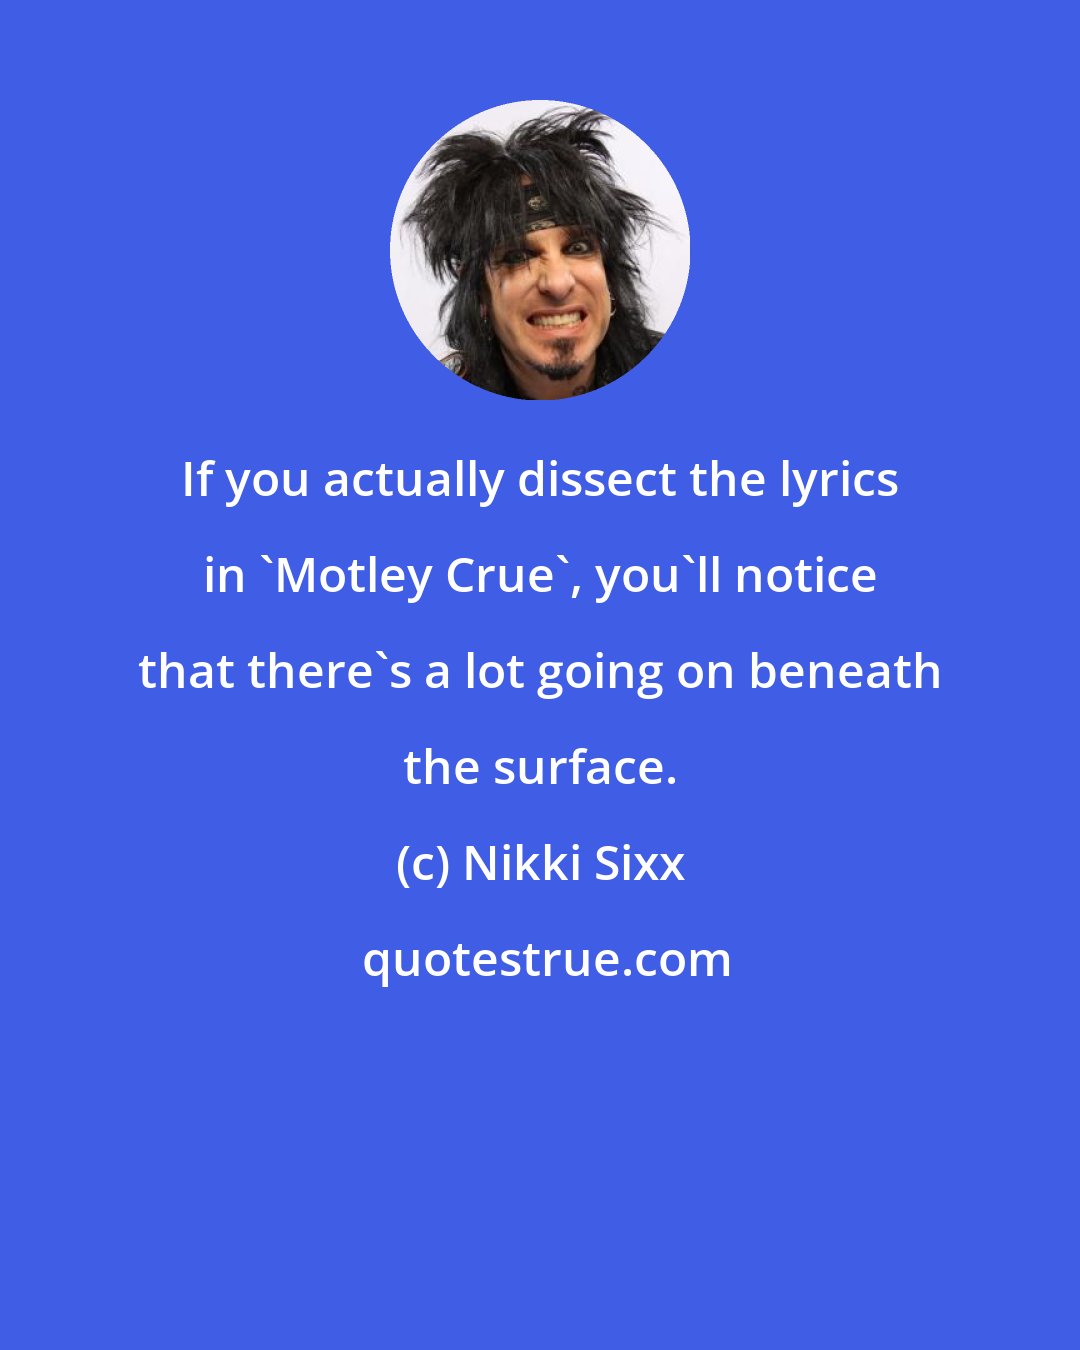 Nikki Sixx: If you actually dissect the lyrics in 'Motley Crue', you'll notice that there's a lot going on beneath the surface.